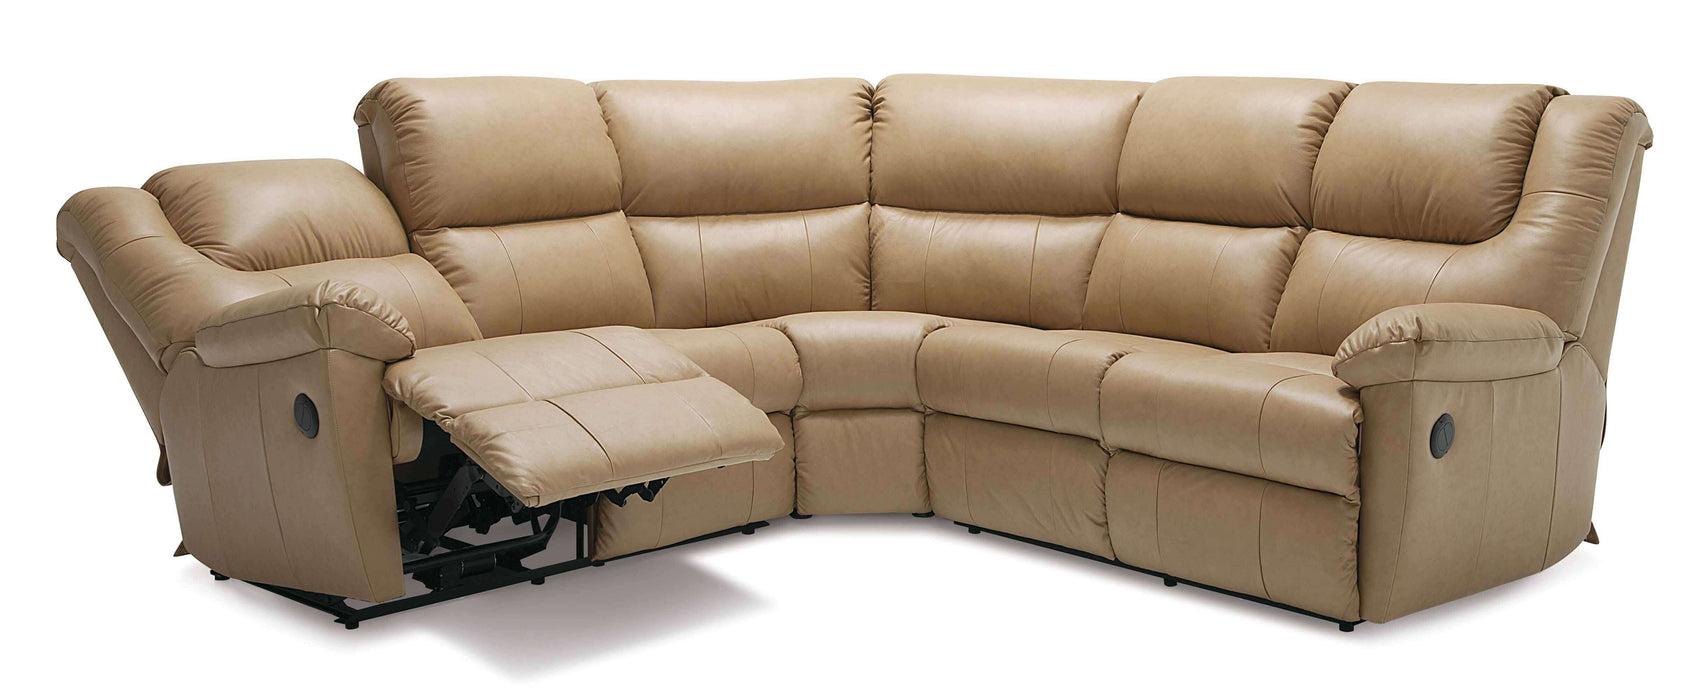 Tundra Leather Reclining Sectional